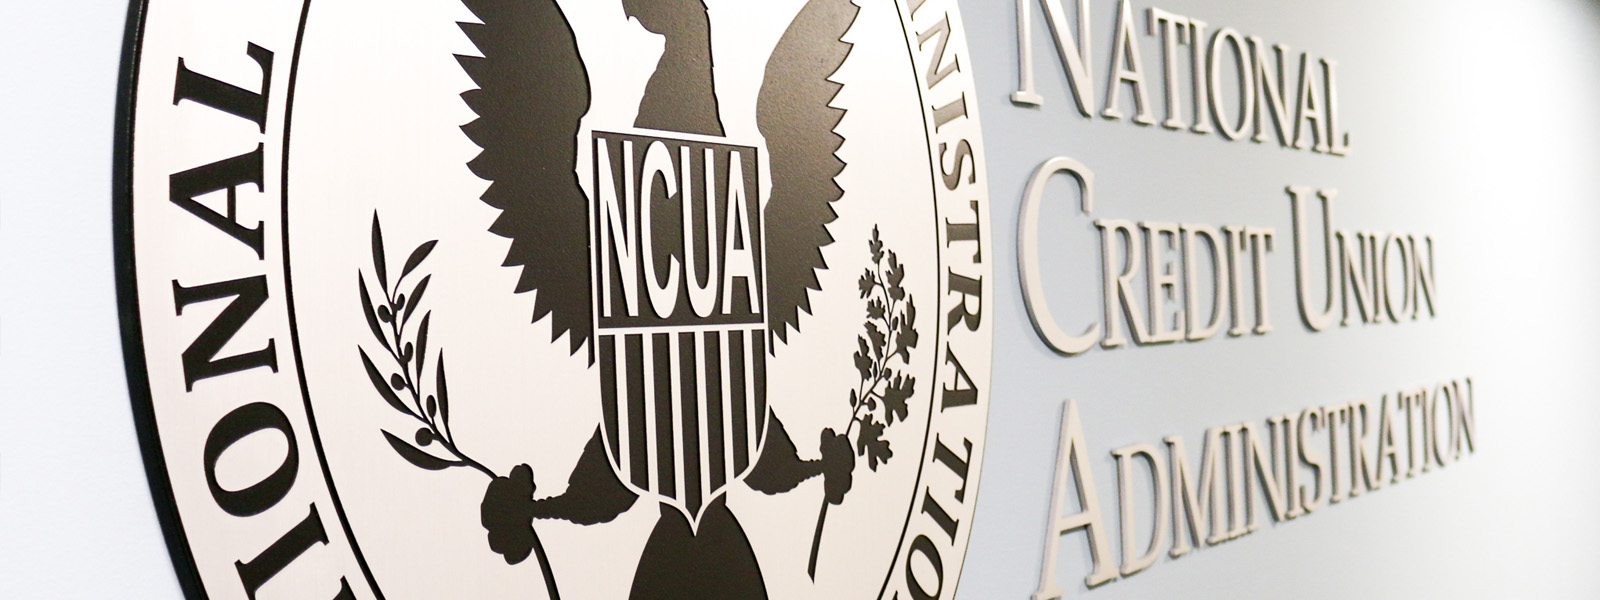 Image of the NCUA seal on a wall